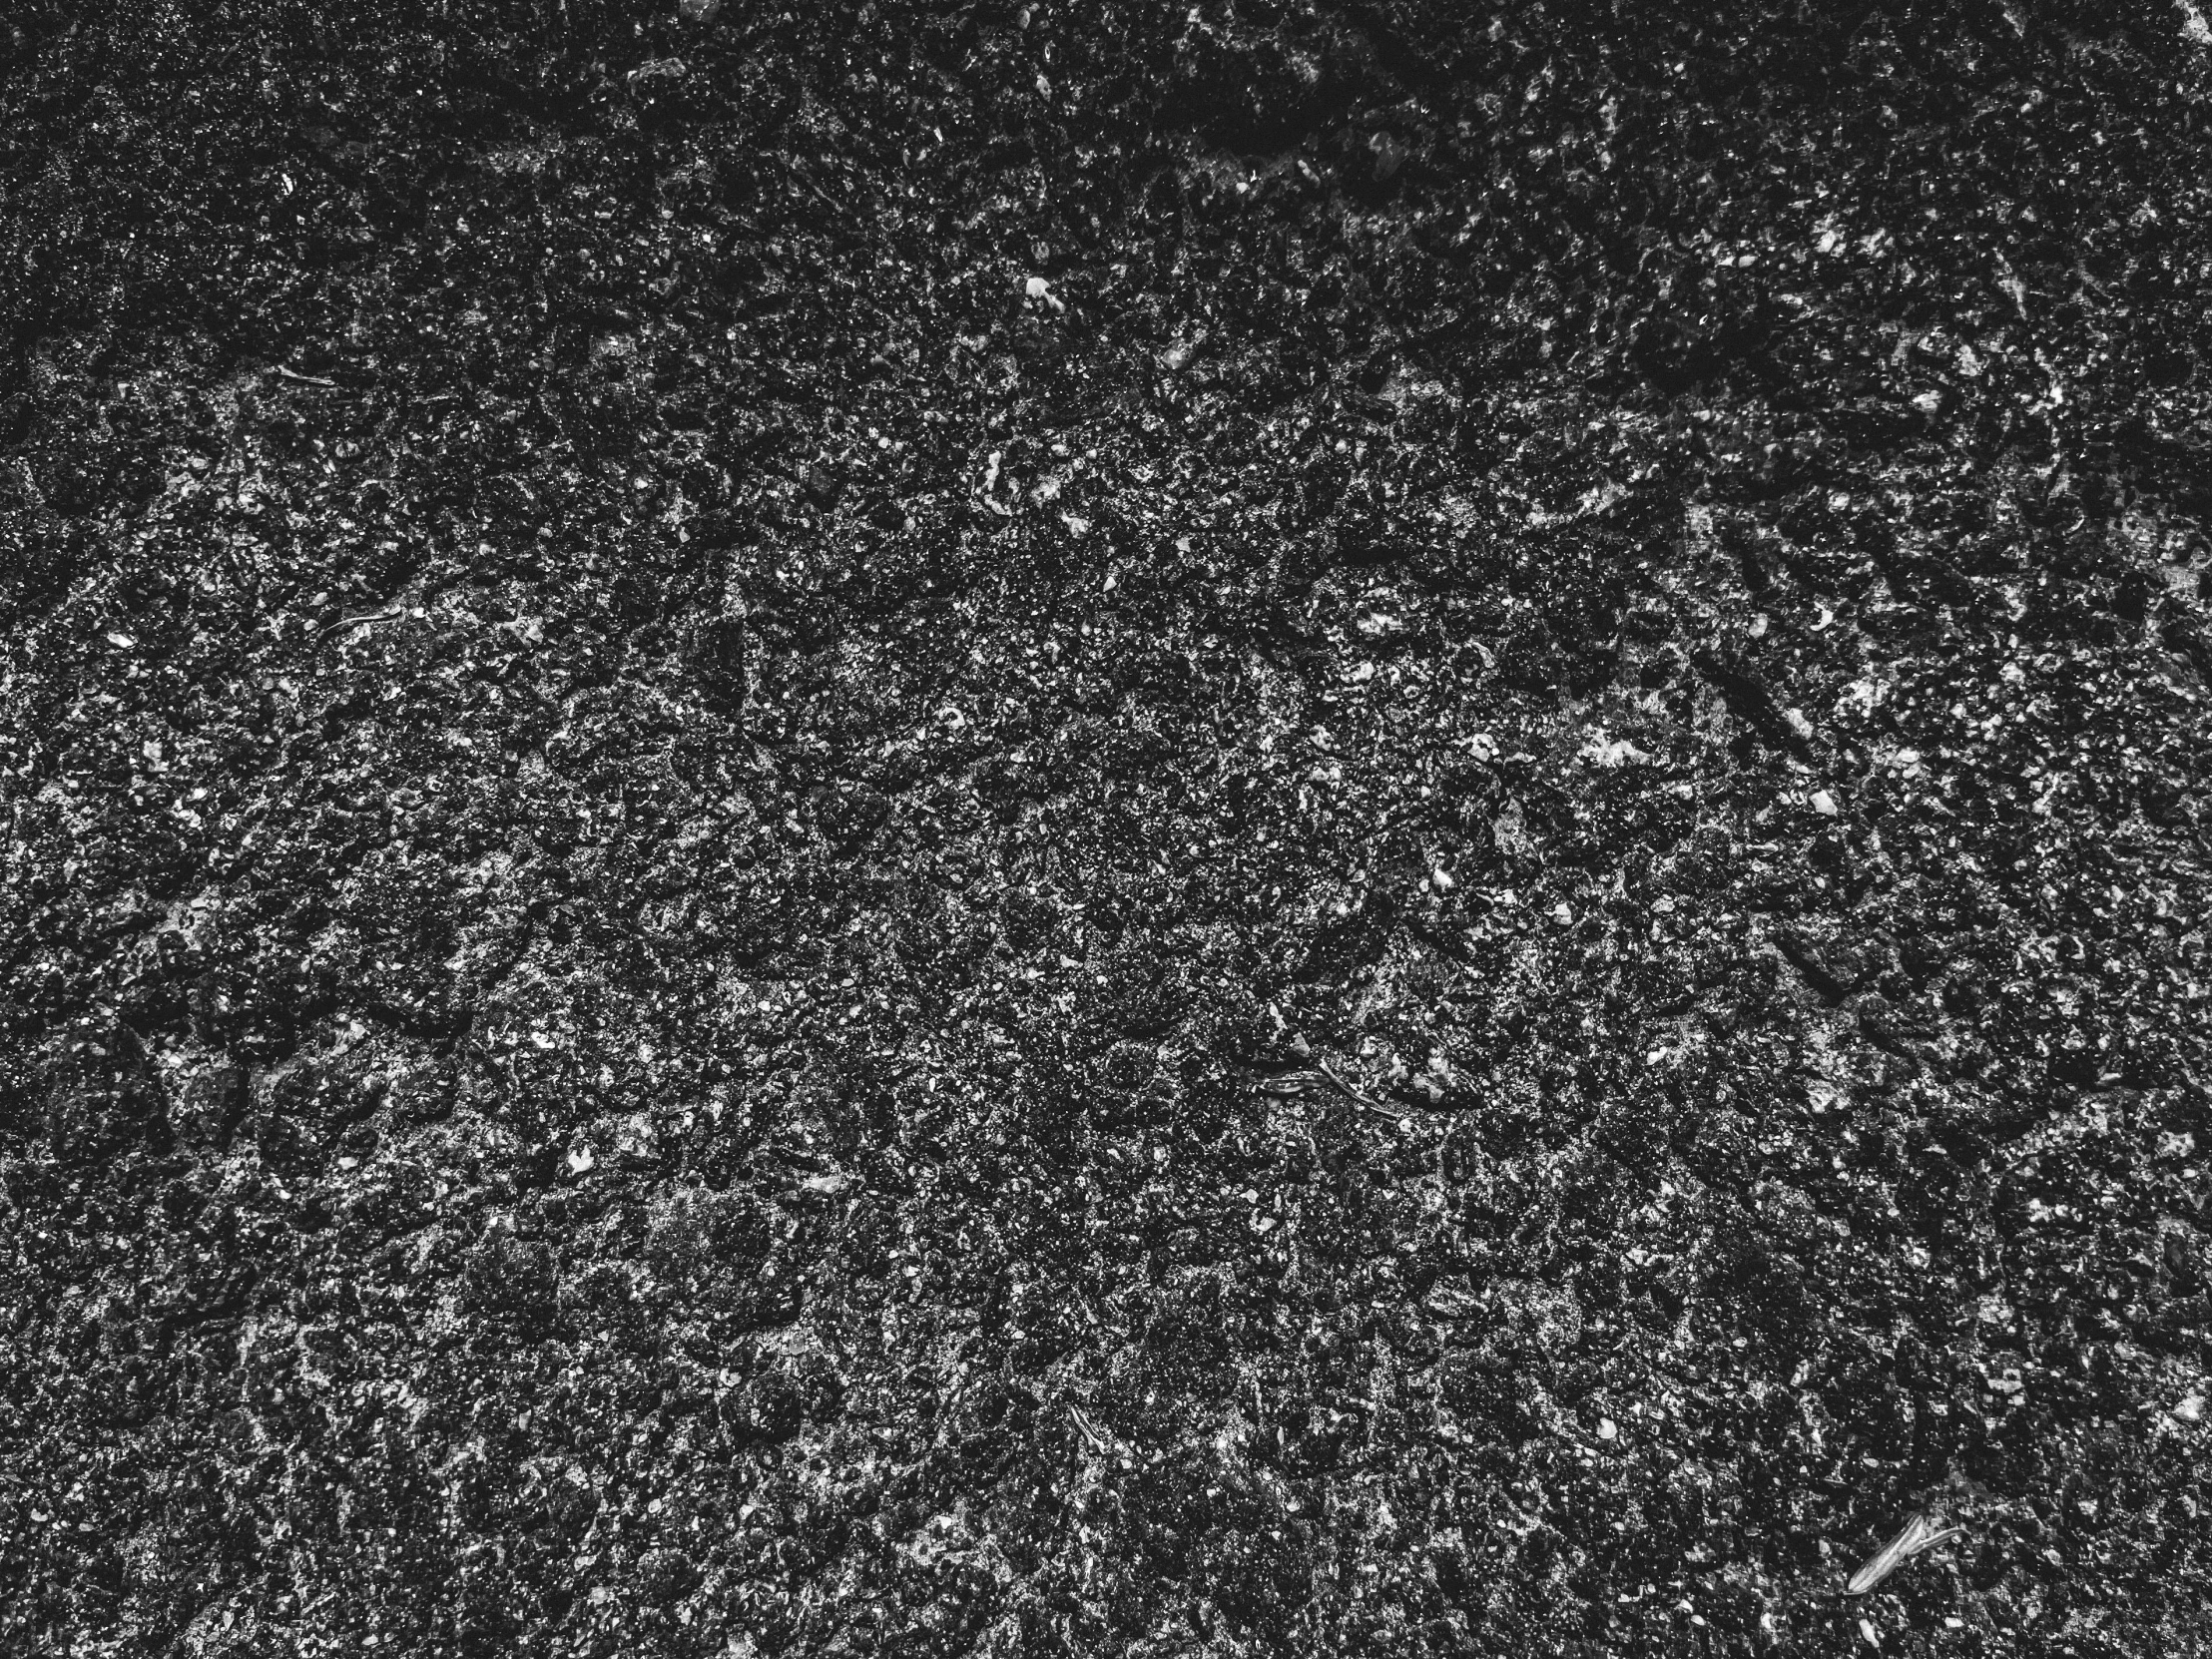 a black and white po of the surface of snow